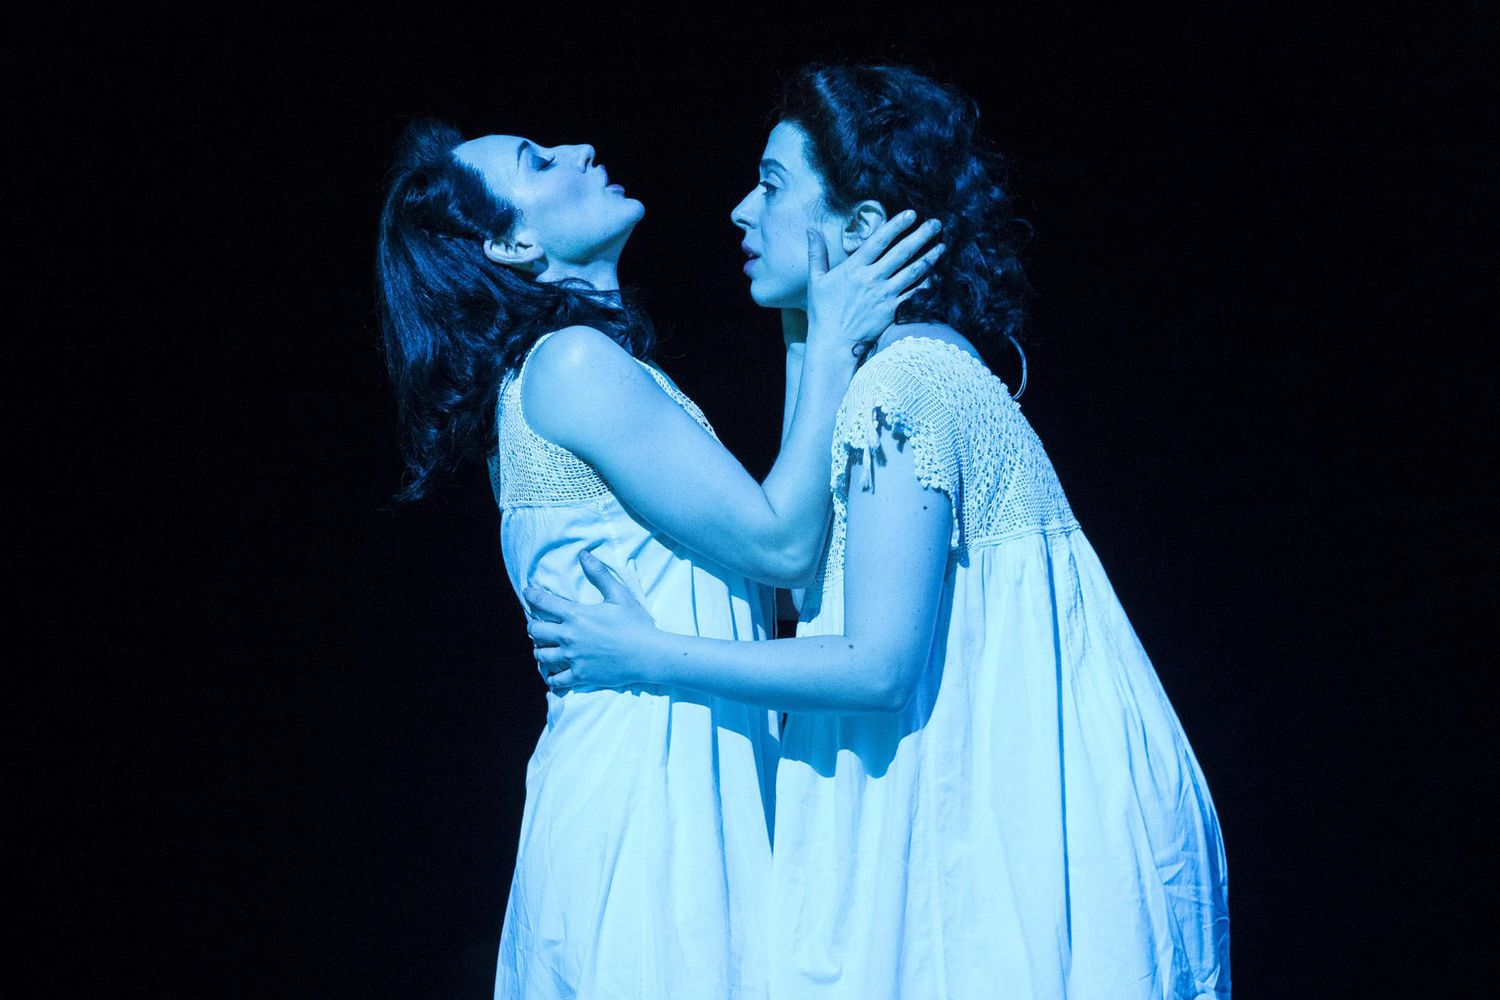 L-R: Elizabeth A. Davis and Adina Verson in Paula Vogel&rsquo;s &ldquo;Indecent.&rdquo; A co-production with Huntington Theatre Company, &ldquo;Indecent&rdquo; runs through July 7, 2019 at the Ahmanson Theatre. For more information, please visit CenterTheatreGroup.org. Press Contact: CTGMedia@CTGLA.org / (213) 972-7376. Photo by Craig Schwartz.